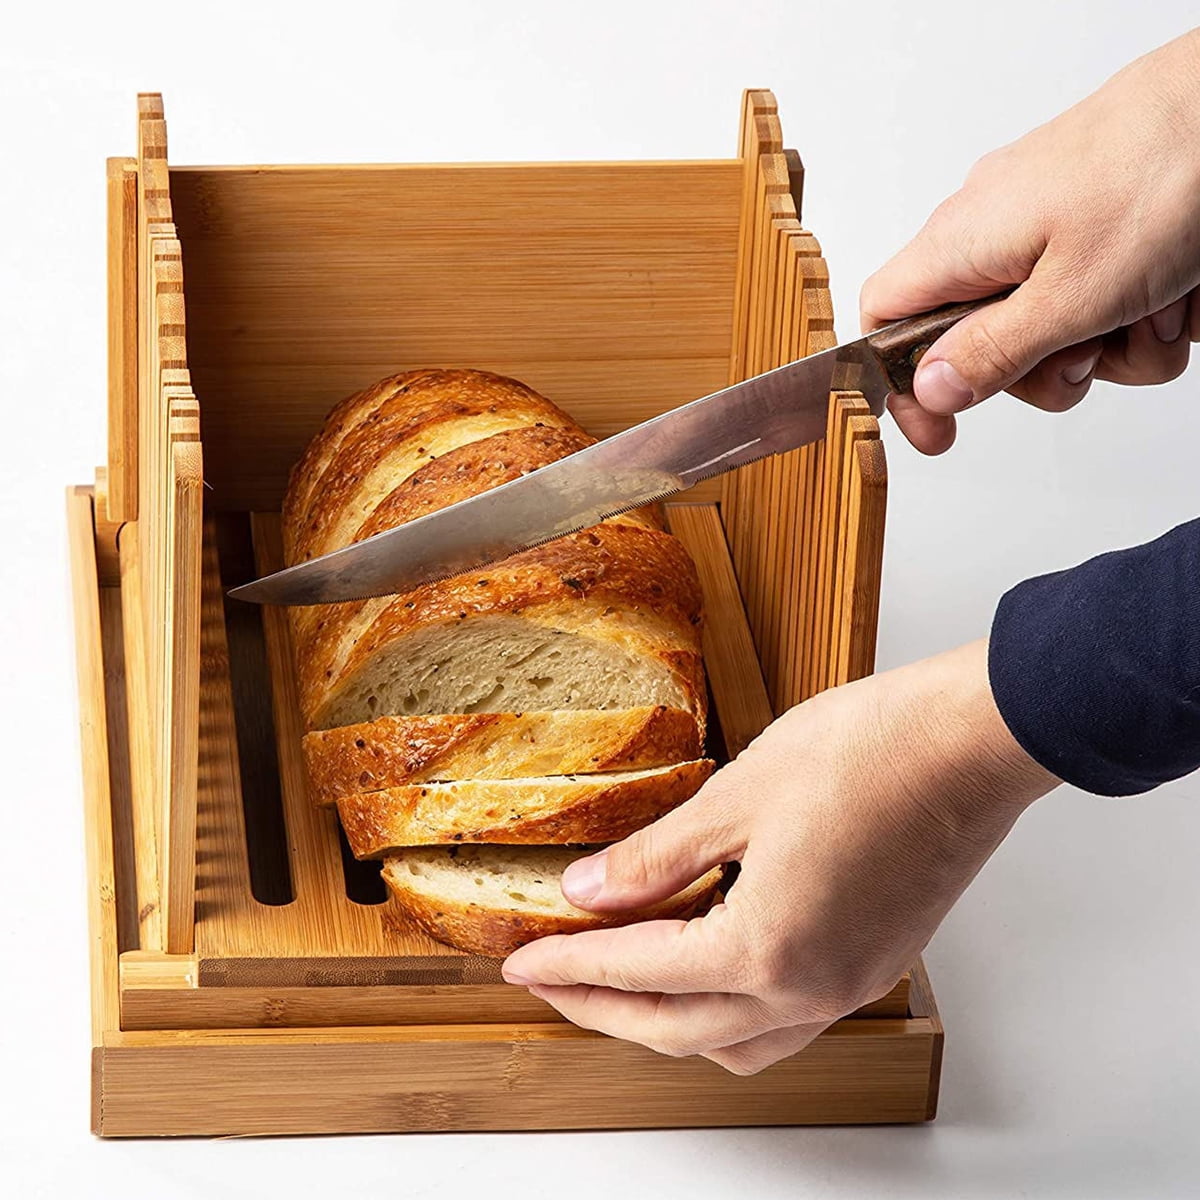 Homiu Bamboo Bread Cutter with Guide Foldable Loaf Slicer for Homemade —  The Homiu